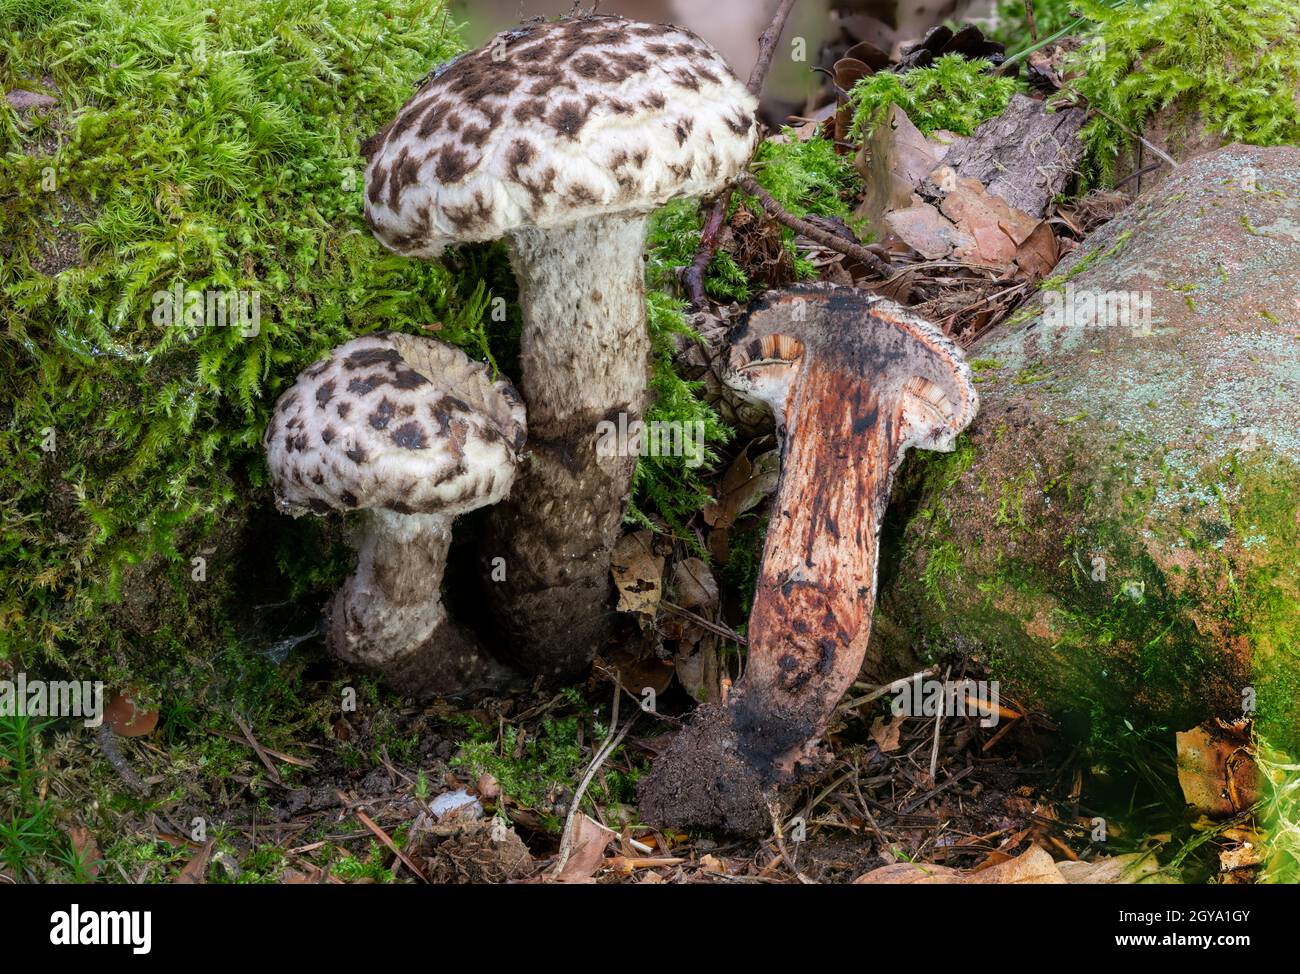 Detail view of a Old Man of the Woods Mushroom Strobilomyces strobilaceus whole and halved in the moss Stock Photo